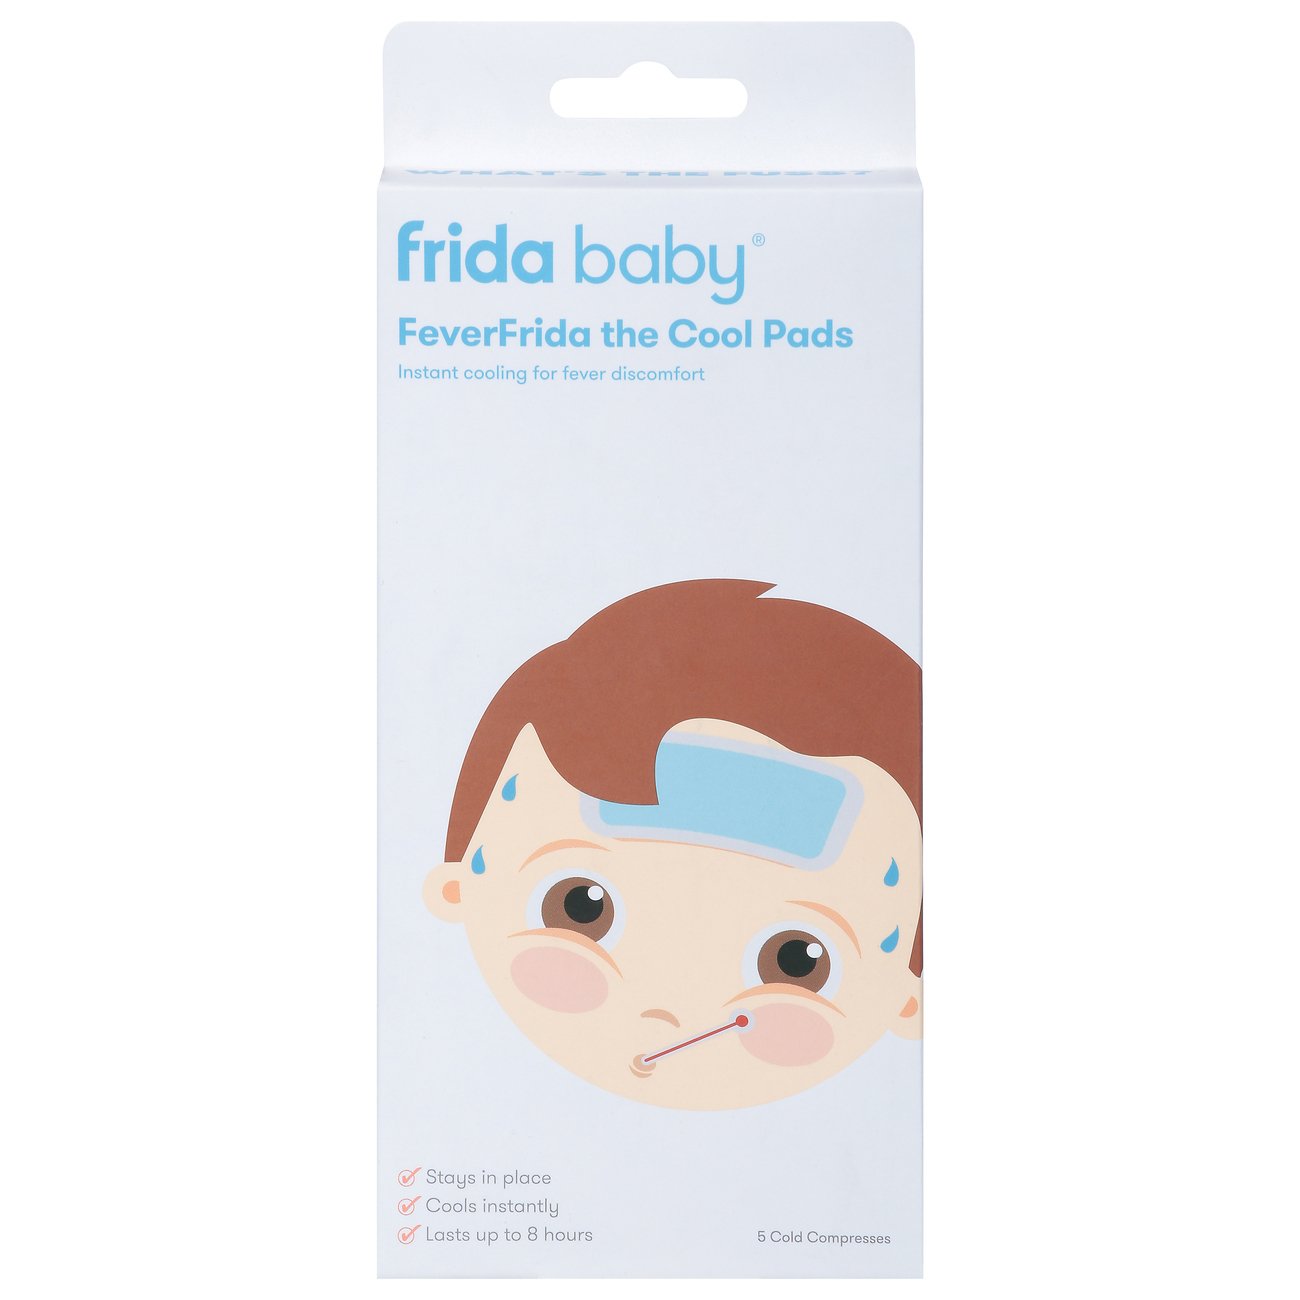 Fridababy Nosefrida Replacement Filters - Shop Medical Devices & Supplies  at H-E-B